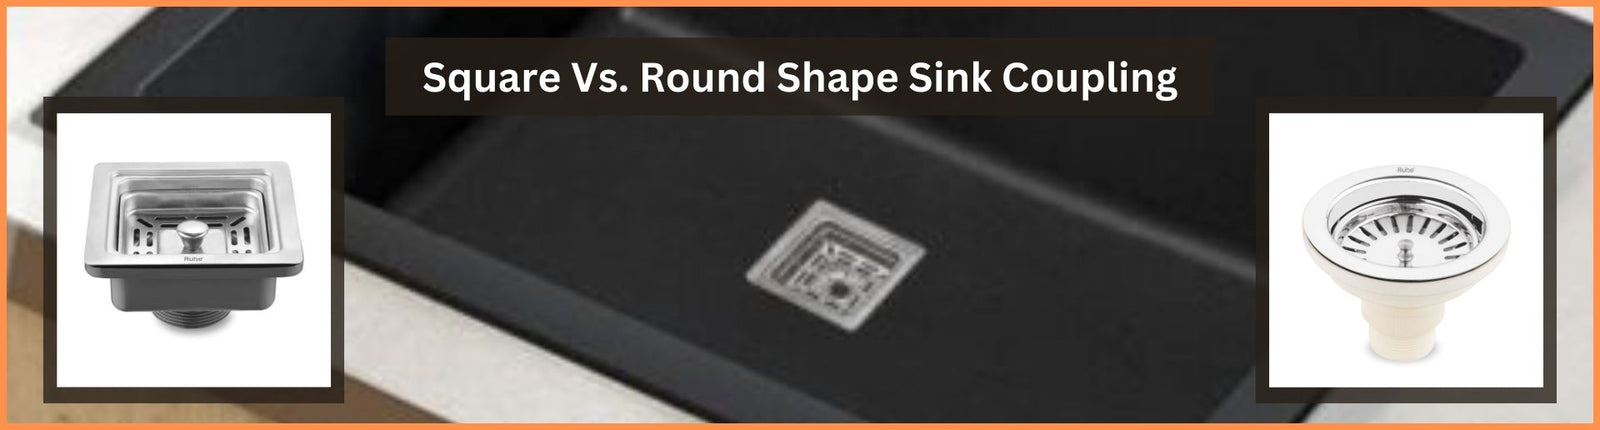 Square Vs. Round Shape Sink Coupling